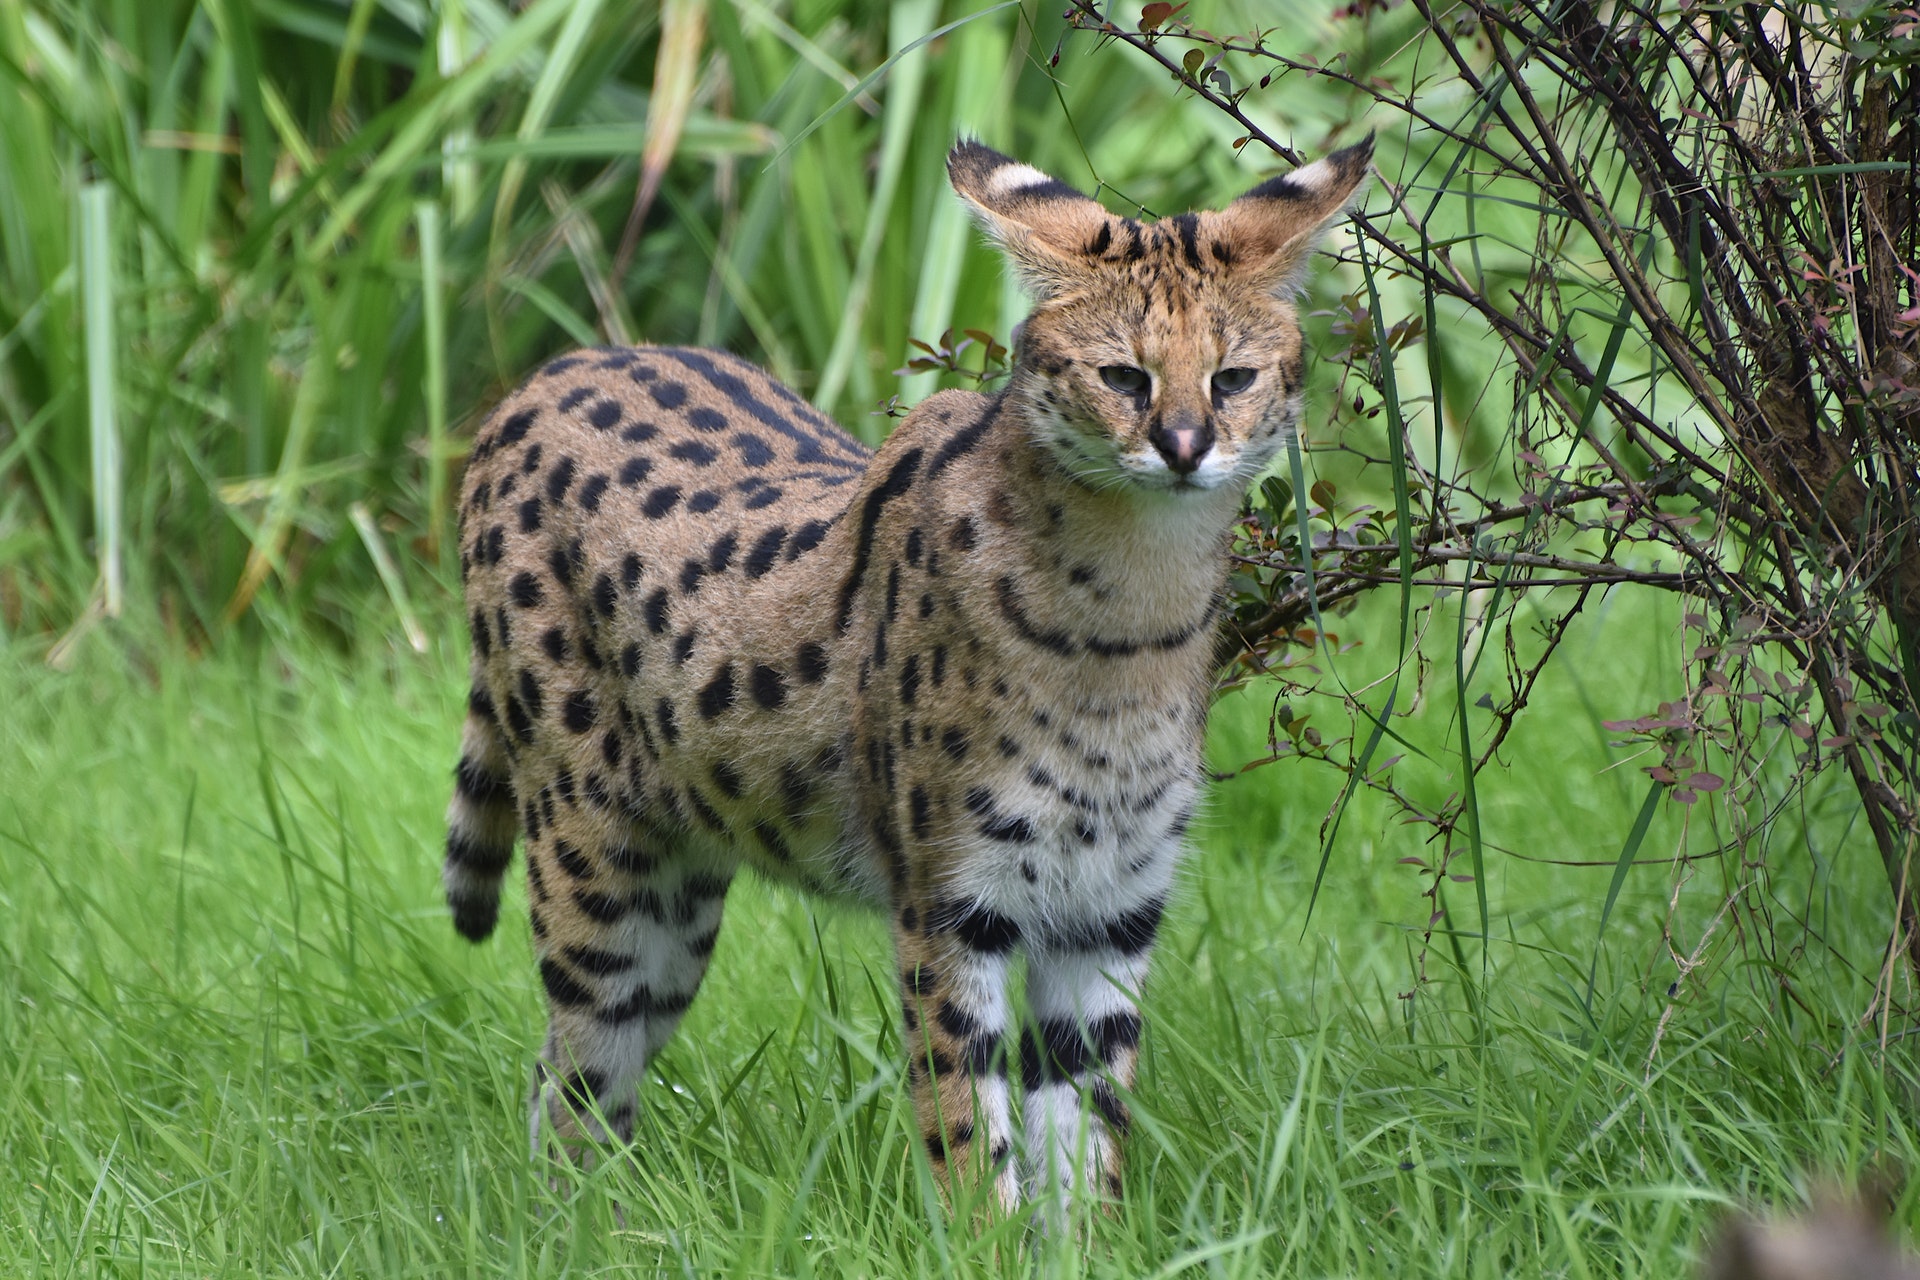 a small serval cat standing in tall grass near some bushes